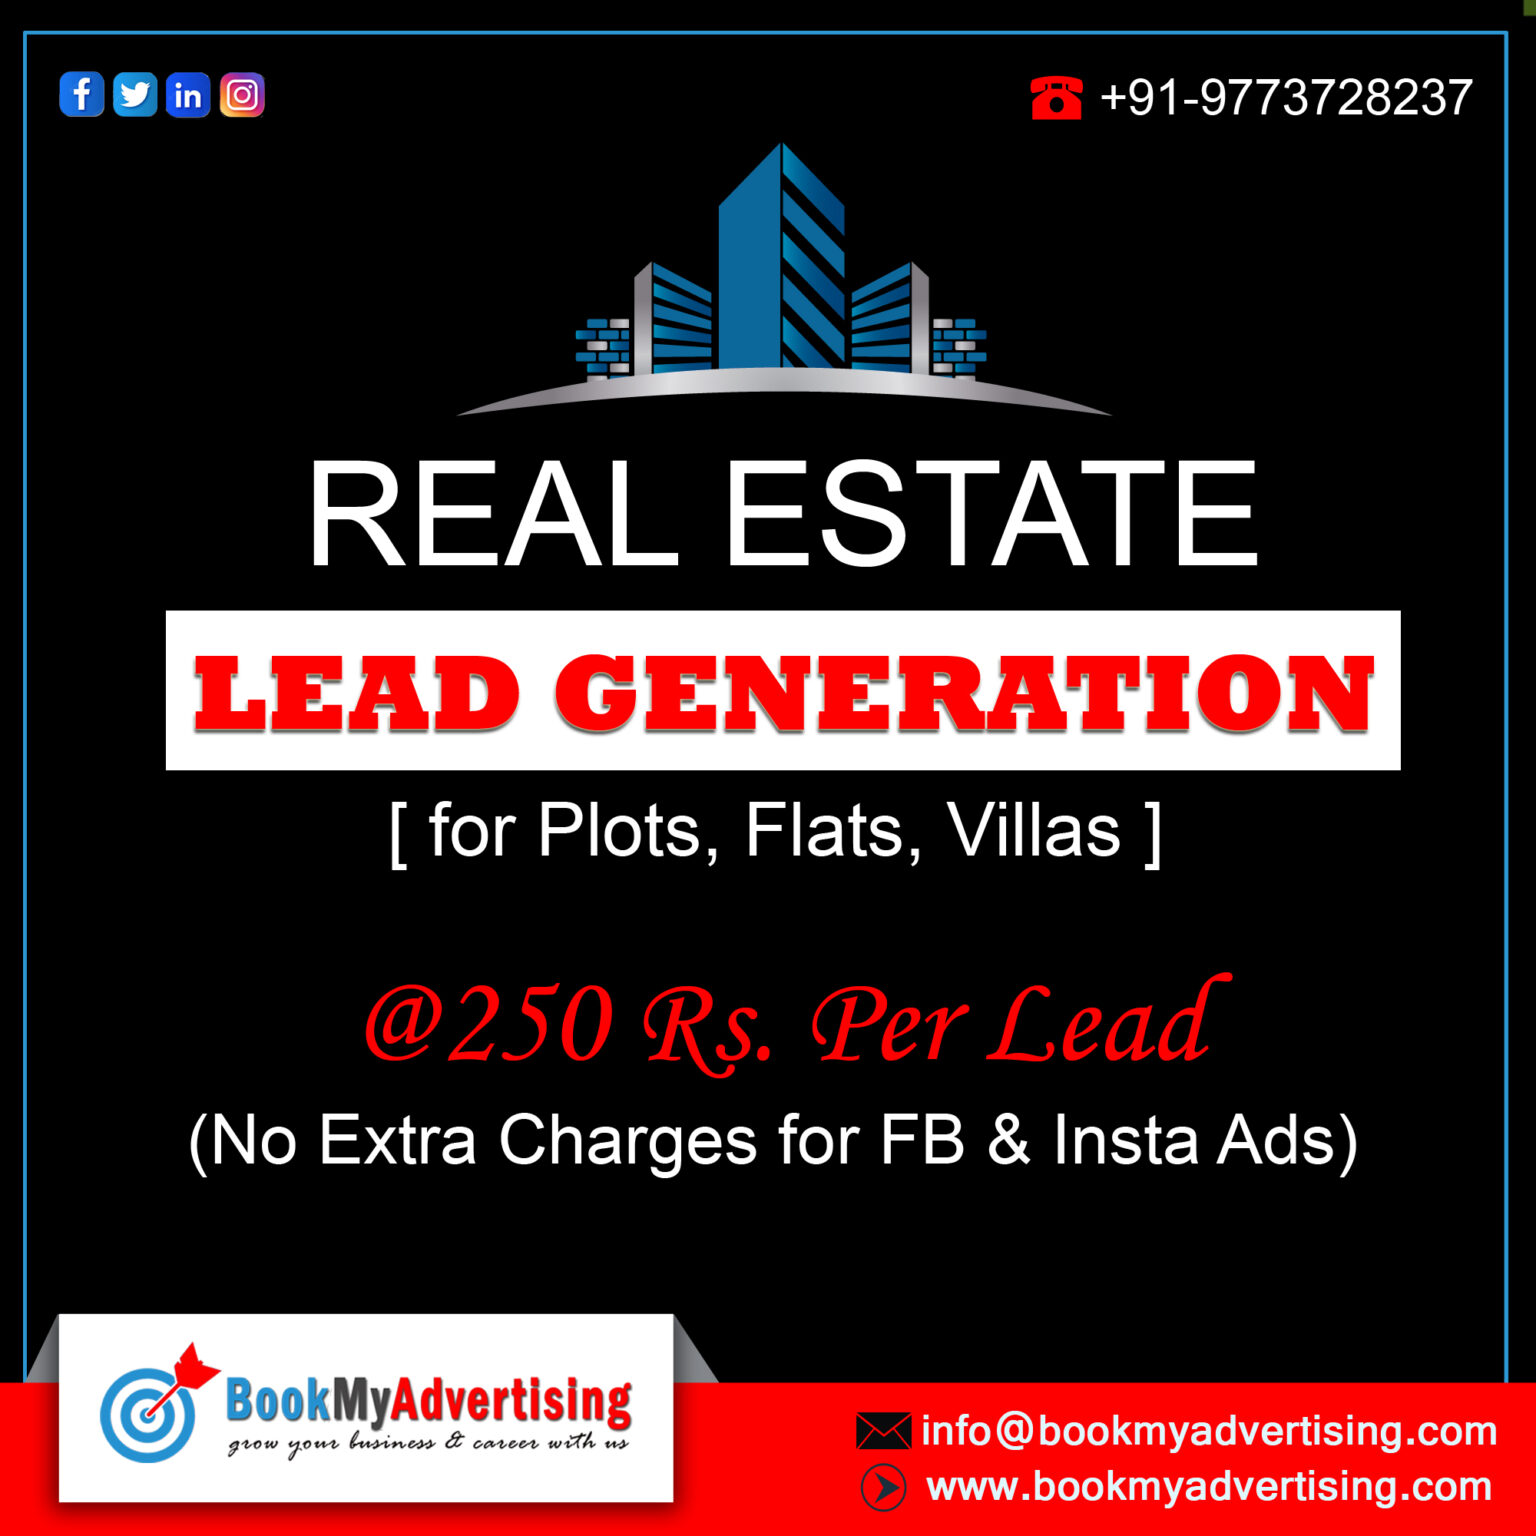 Lead Generation for Real Estate